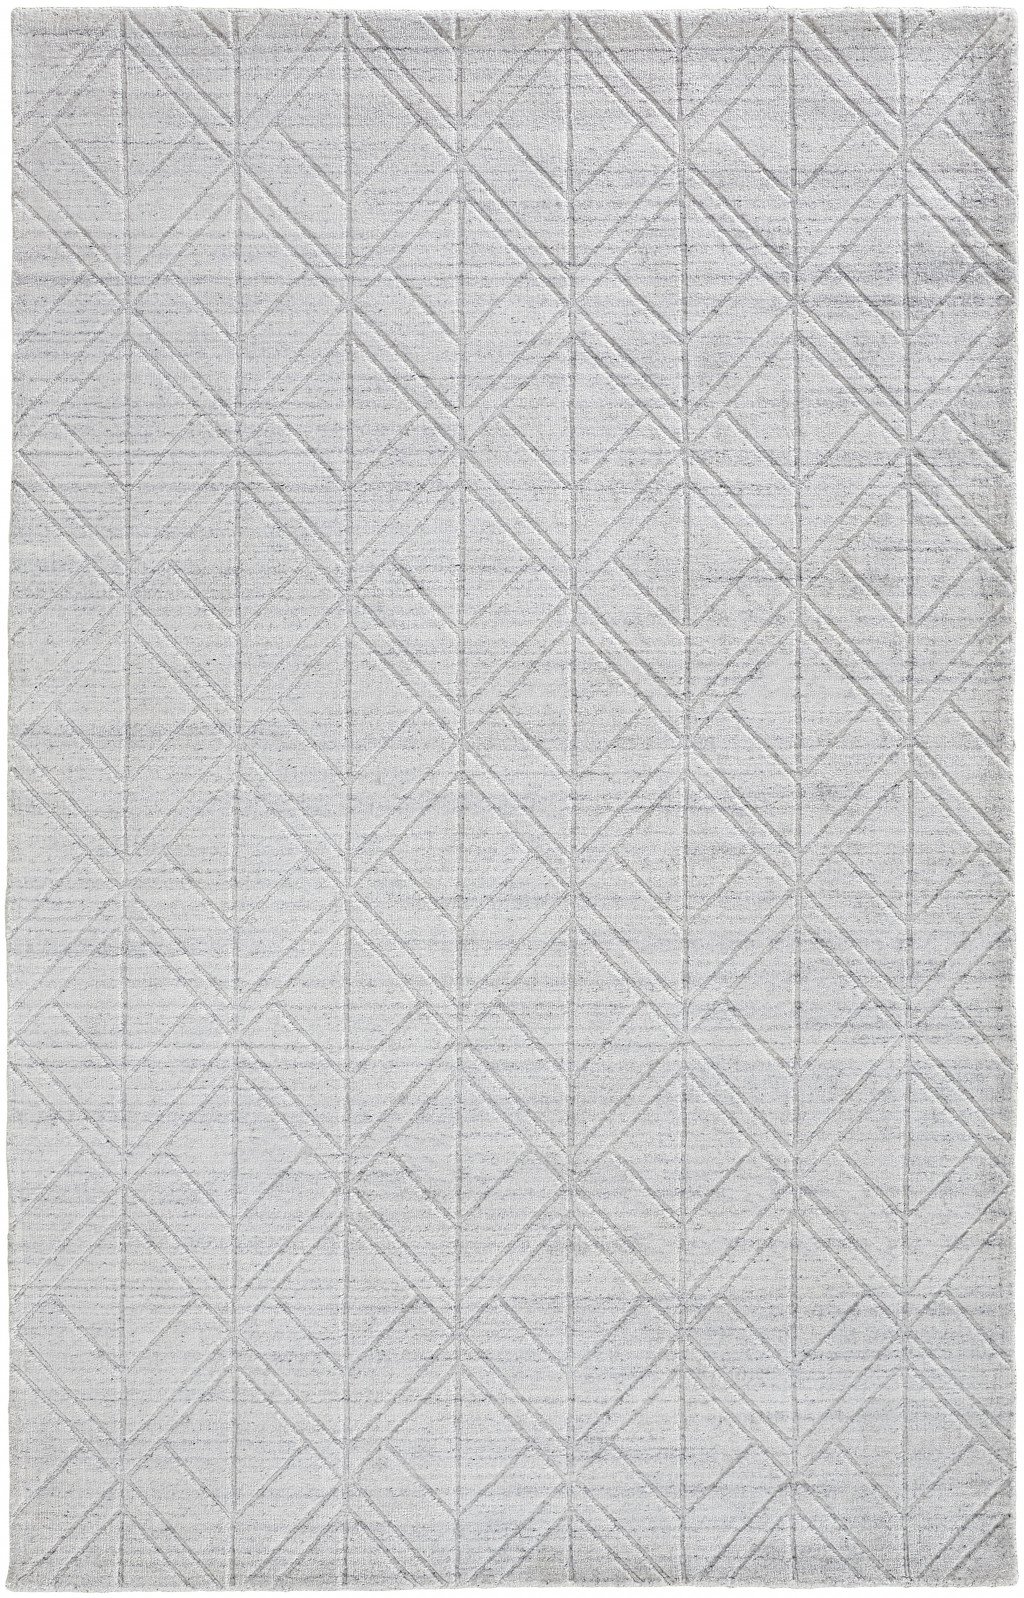 5' X 8' White And Silver Striped Hand Woven Area Rug-514778-1